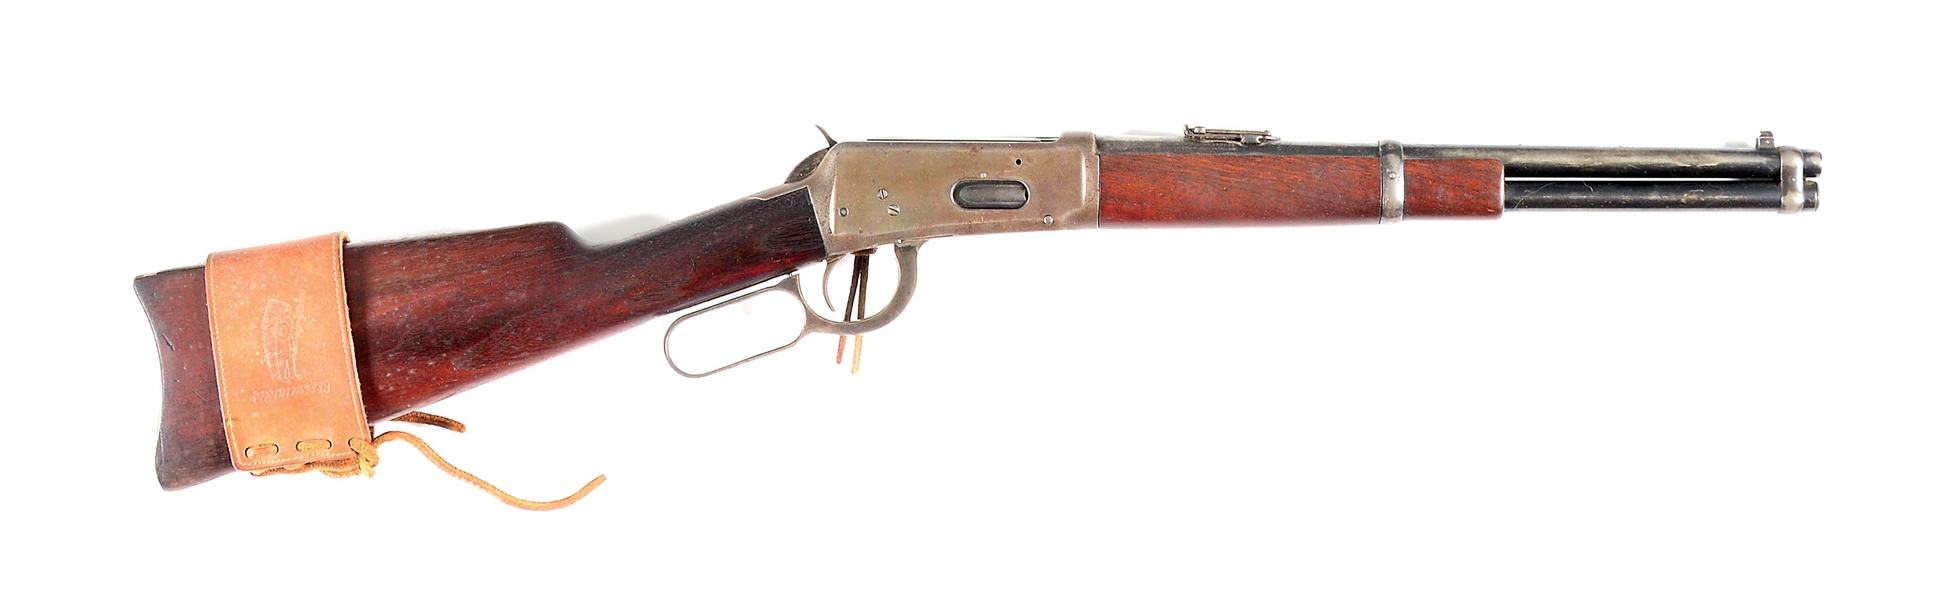 (C) WINCHESTER MODEL 1894 TRAPPER LEVER ACTION CARBINE WITH ATF EXEMPTION LETTER (1913).